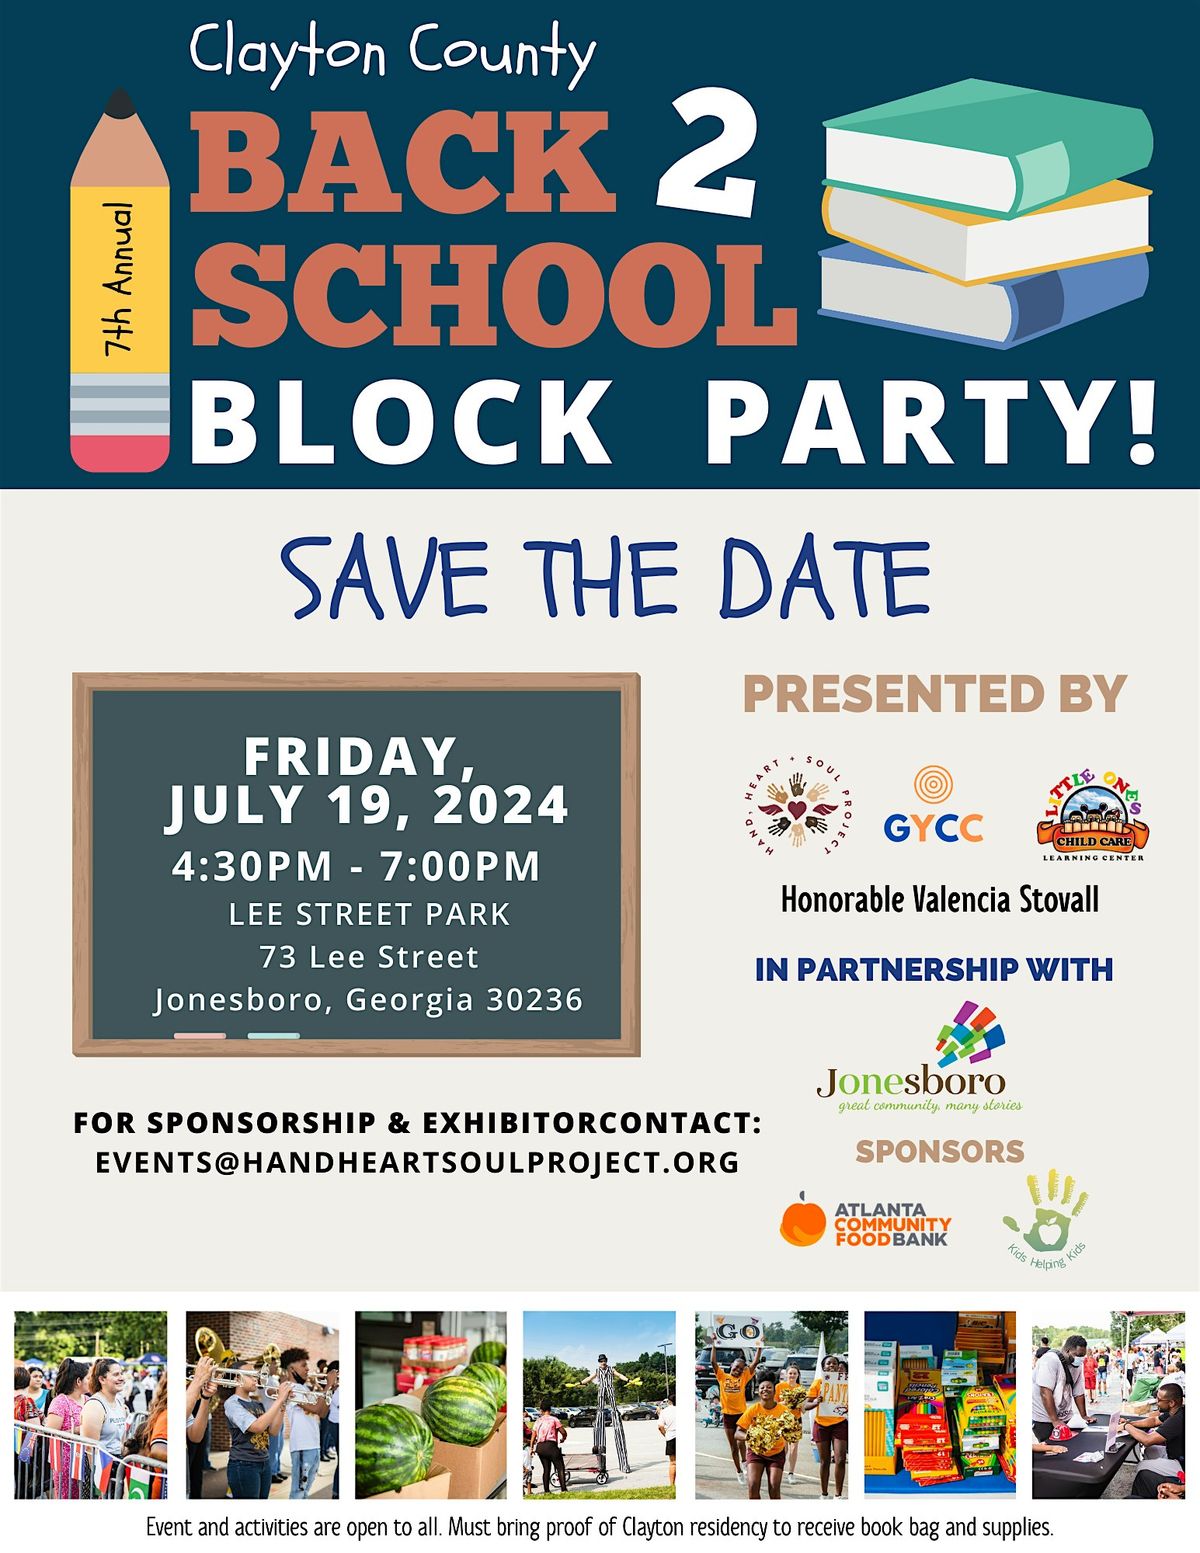 Annual Clayton County Back to School Block Party